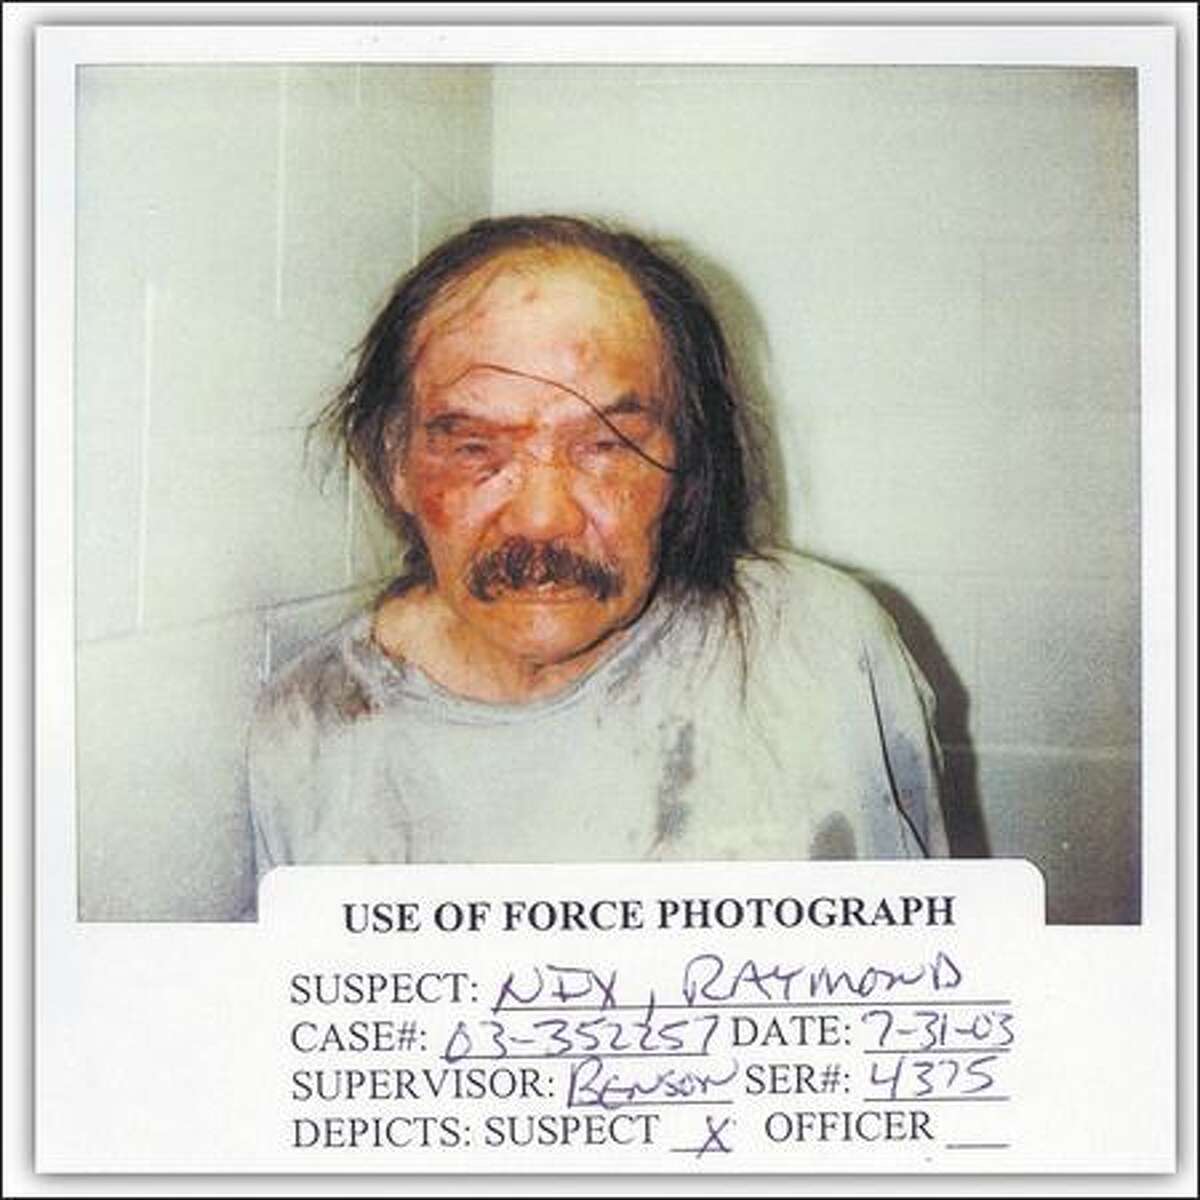 Raymond Nix was beaten so badly by police officers outside of a Denny Regrade bar that he nearly died four days later from a lacerated spleen. This photo was taken shortly after his July 31, 2003, arrest. (Photo provide by King County Prosecutor's Office)